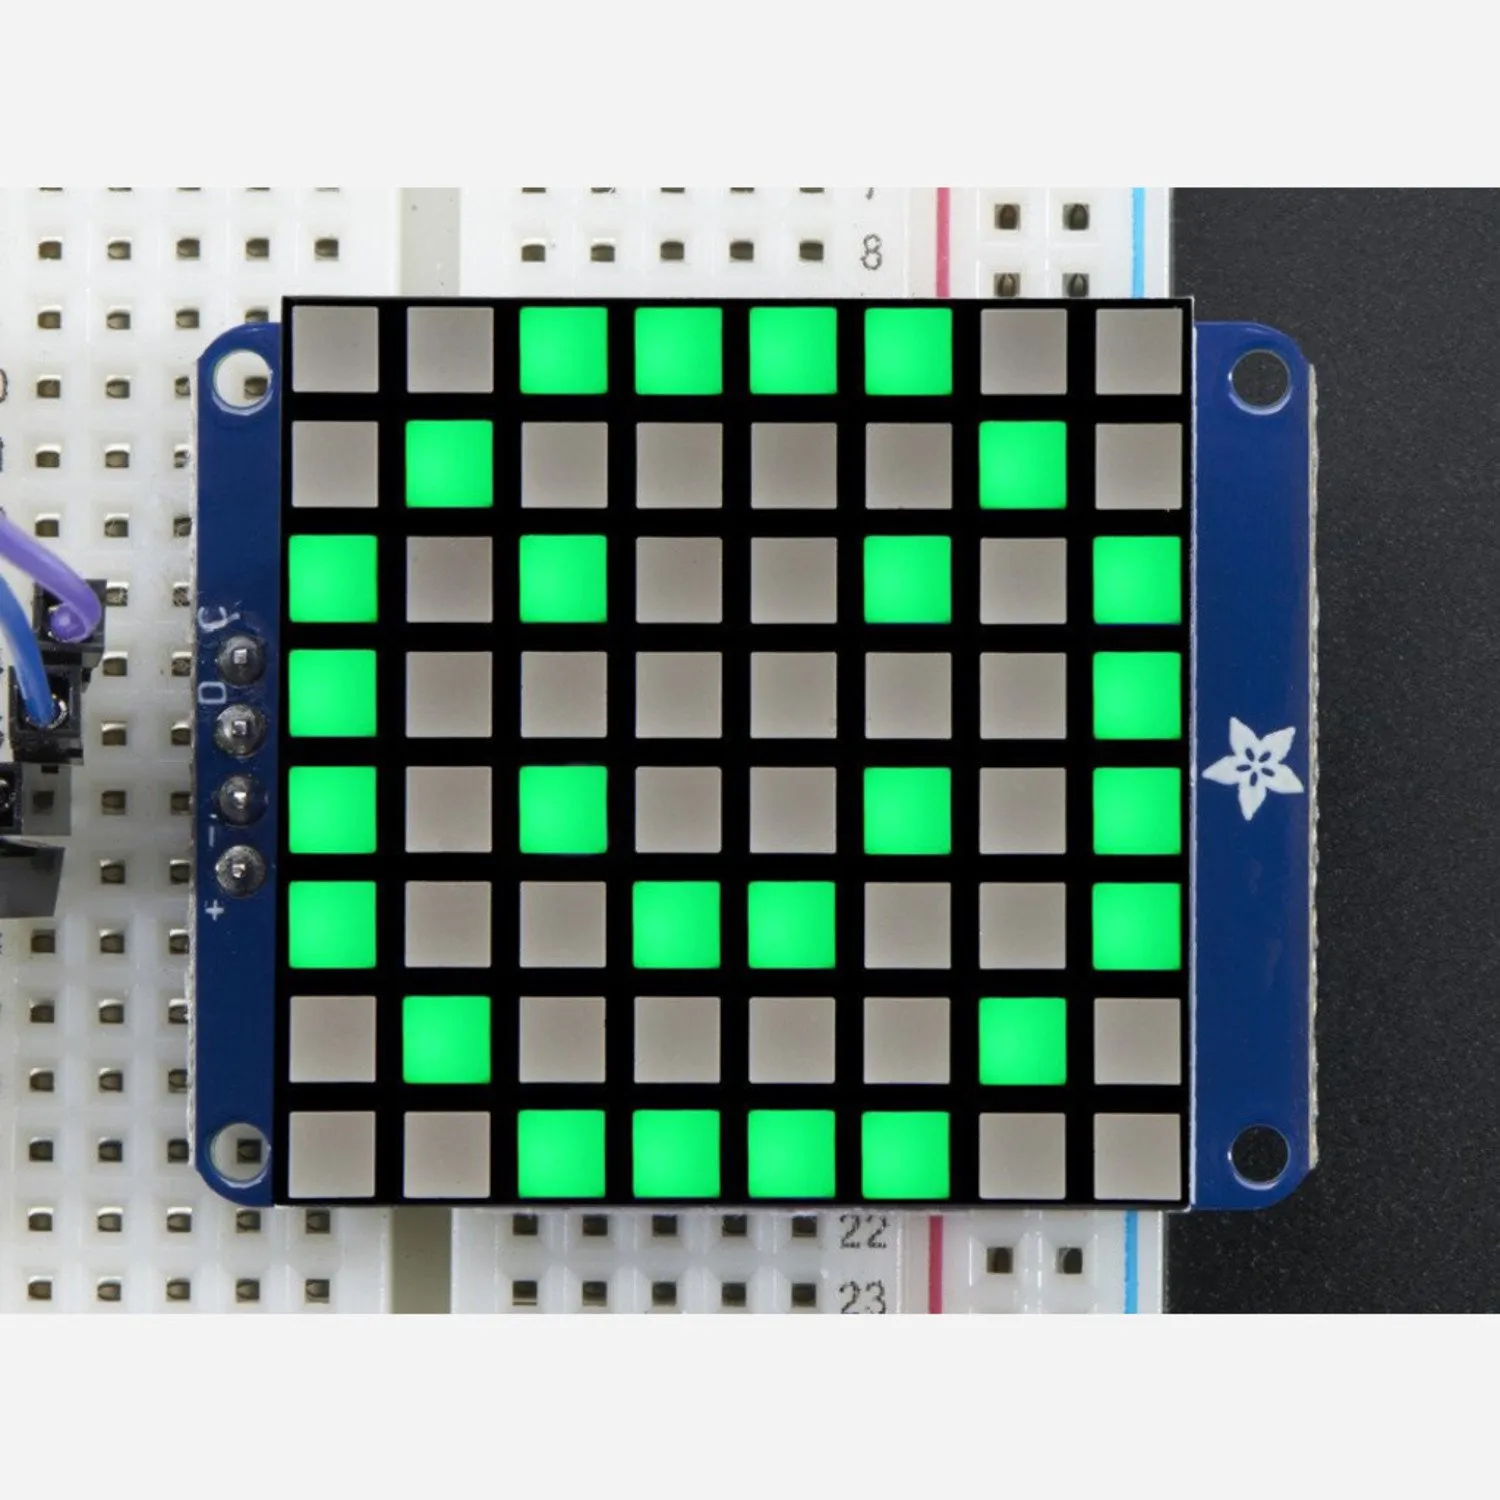 Photo of Small 1.2 8x8 Bright Square LED Matrix + Backpack - Green